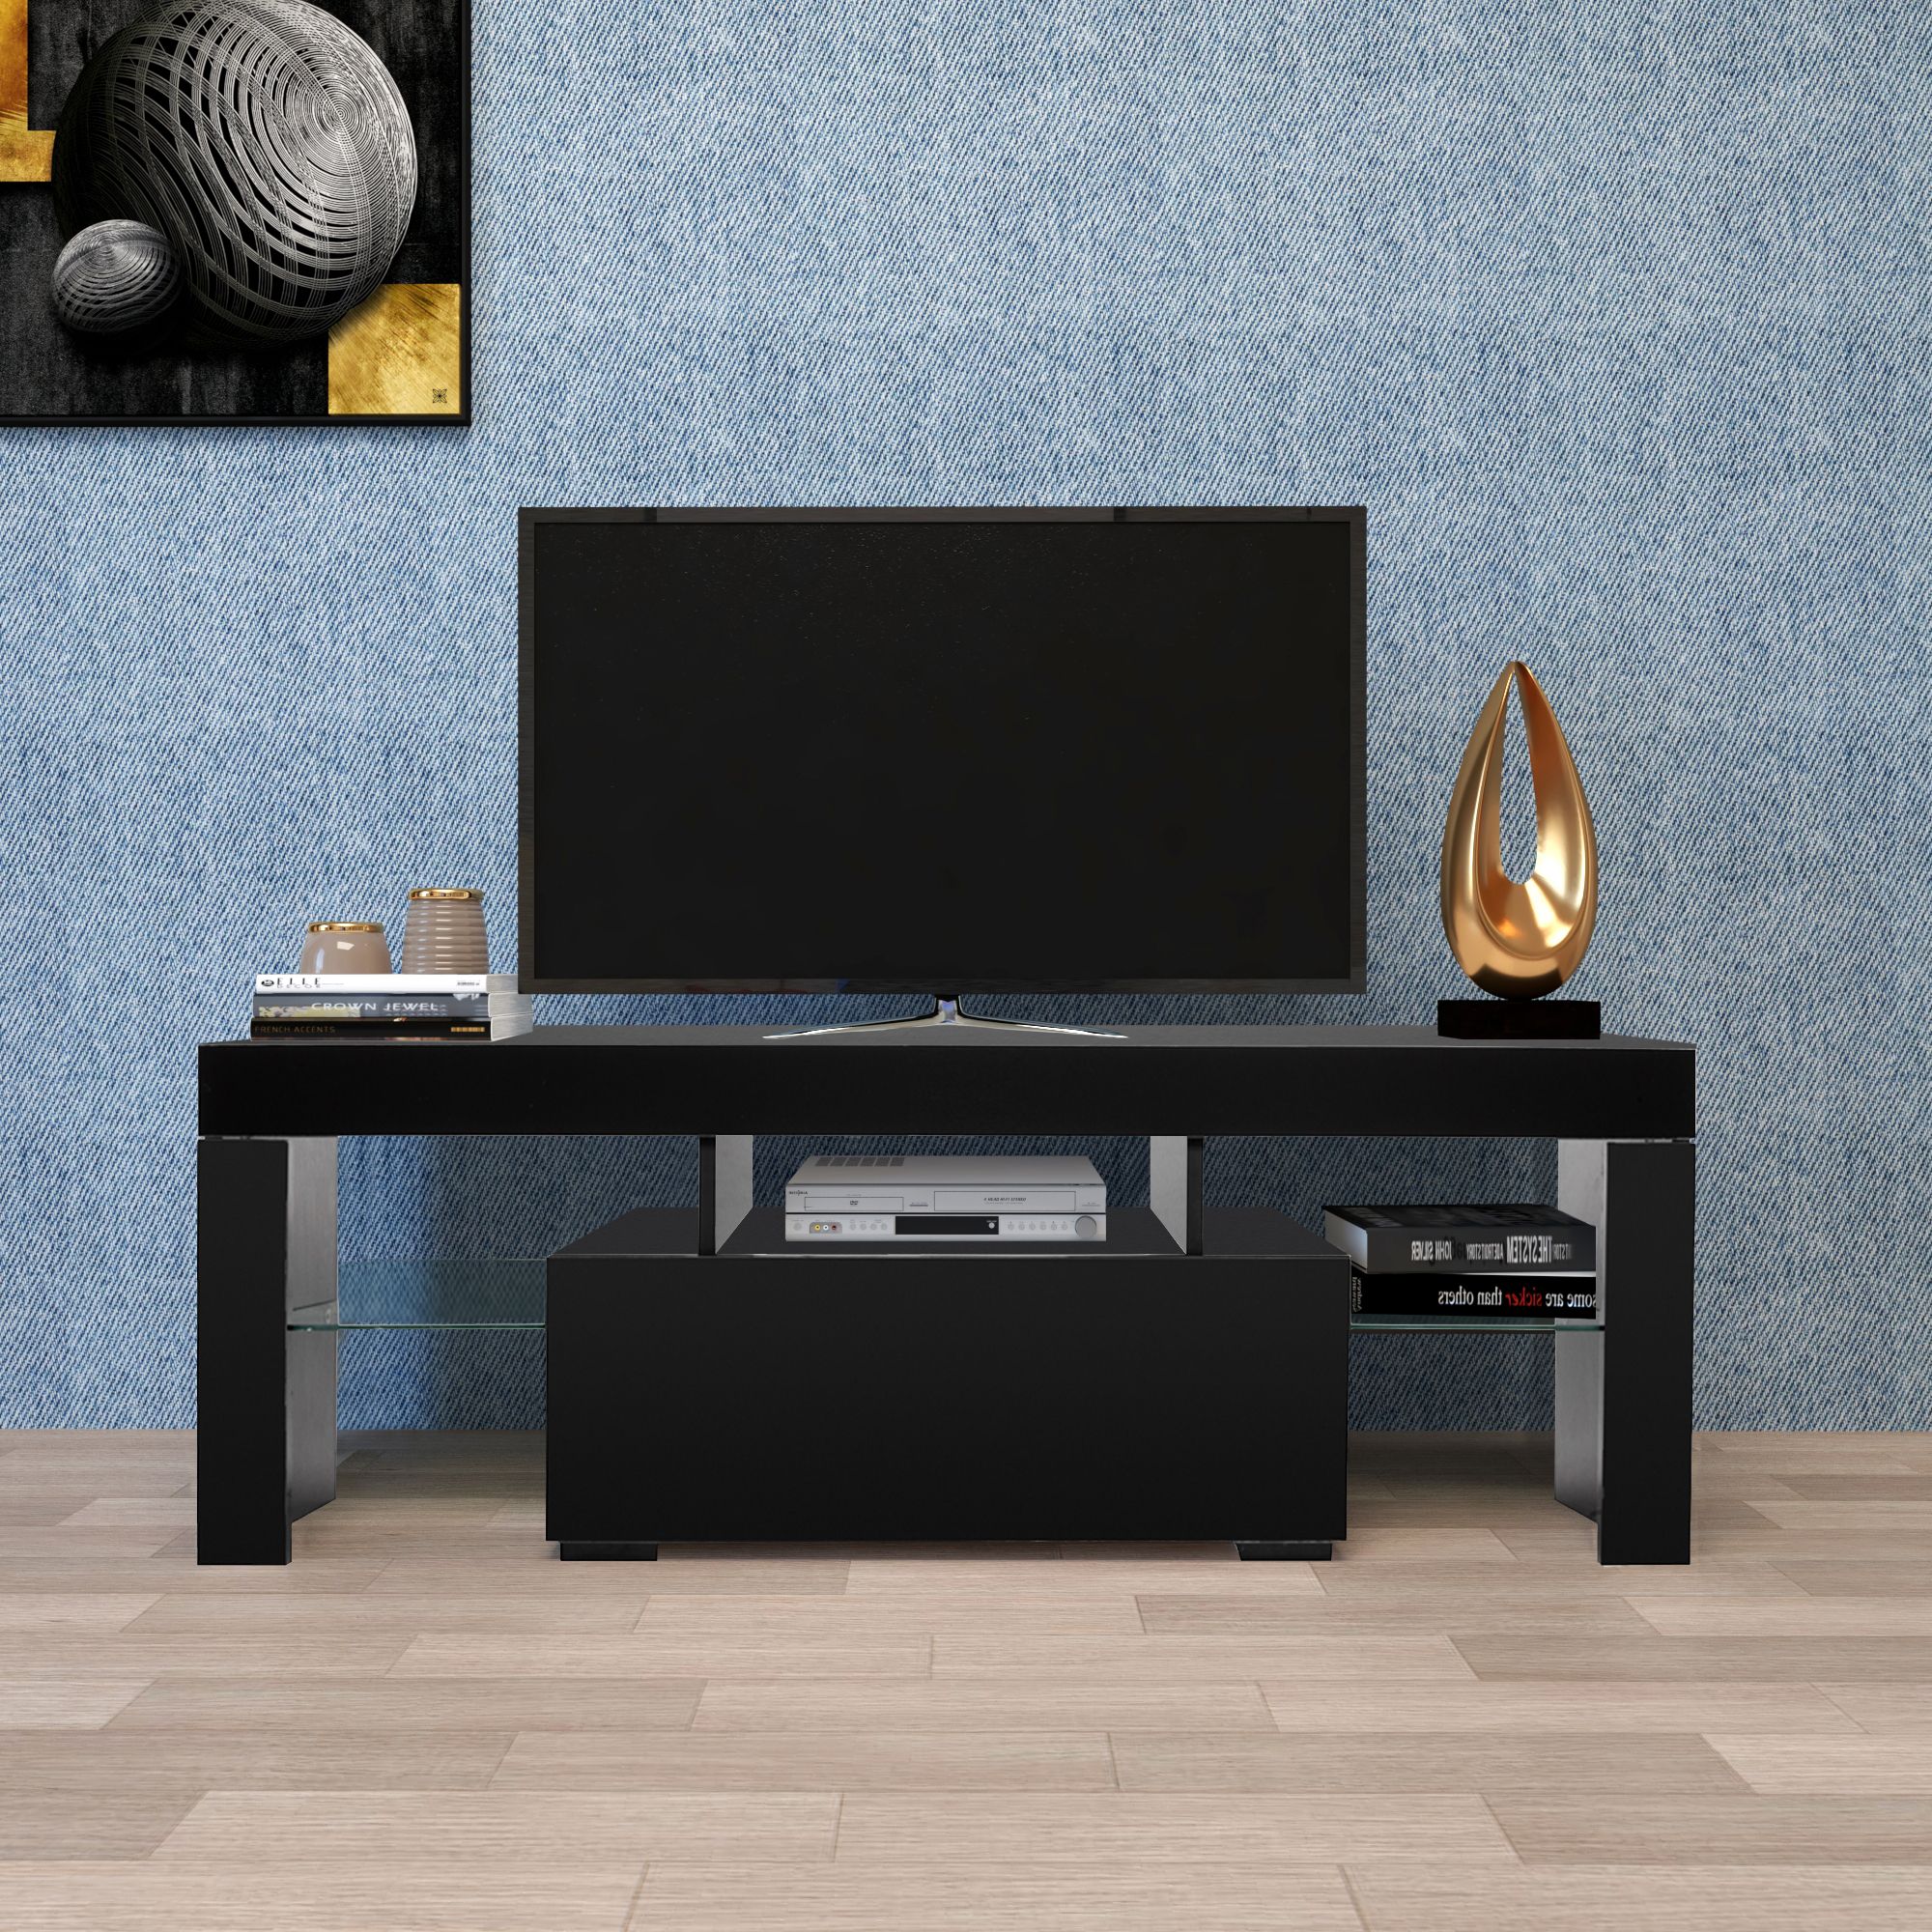 Entertainment Centers And Tv Stands, Yofe Tv Stand With Regarding Tabletop Tv Stand (View 4 of 15)